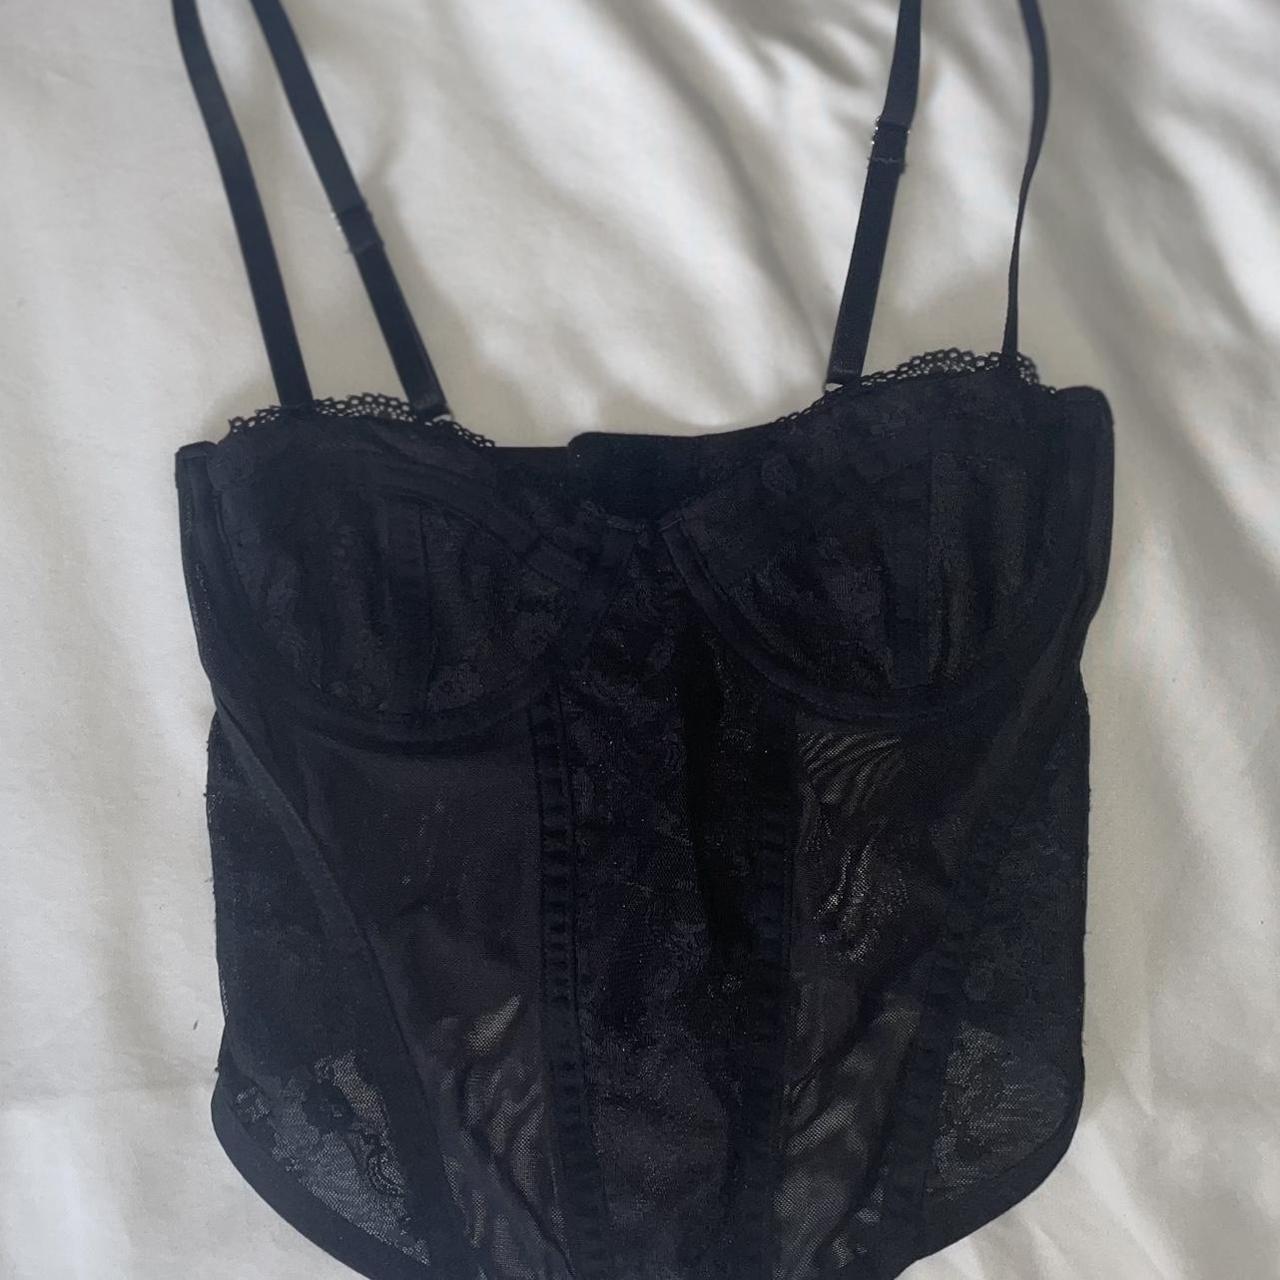 H&M black corset top Brand new with tags still on... - Depop